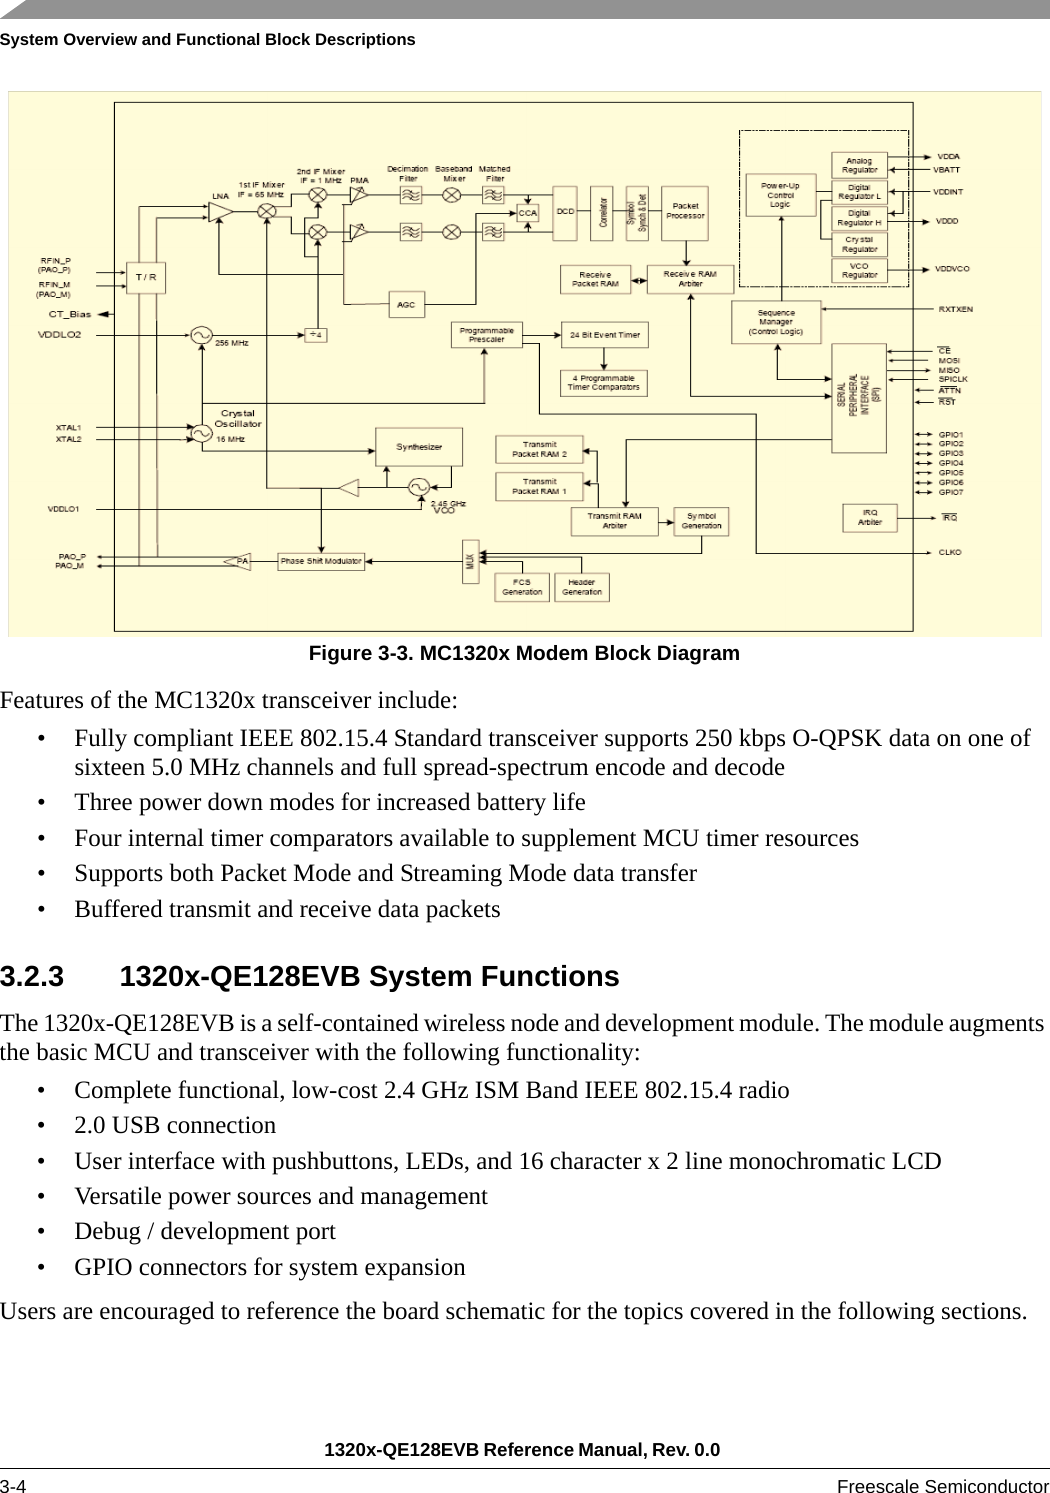 System Overview and Functional Block Descriptions1320x-QE128EVB Reference Manual, Rev. 0.0 3-4 Freescale SemiconductorFigure 3-3. MC1320x Modem Block DiagramFeatures of the MC1320x transceiver include:• Fully compliant IEEE 802.15.4 Standard transceiver supports 250 kbps O-QPSK data on one of sixteen 5.0 MHz channels and full spread-spectrum encode and decode• Three power down modes for increased battery life• Four internal timer comparators available to supplement MCU timer resources• Supports both Packet Mode and Streaming Mode data transfer• Buffered transmit and receive data packets3.2.3 1320x-QE128EVB System FunctionsThe 1320x-QE128EVB is a self-contained wireless node and development module. The module augments the basic MCU and transceiver with the following functionality:• Complete functional, low-cost 2.4 GHz ISM Band IEEE 802.15.4 radio• 2.0 USB connection• User interface with pushbuttons, LEDs, and 16 character x 2 line monochromatic LCD• Versatile power sources and management• Debug / development port• GPIO connectors for system expansionUsers are encouraged to reference the board schematic for the topics covered in the following sections.